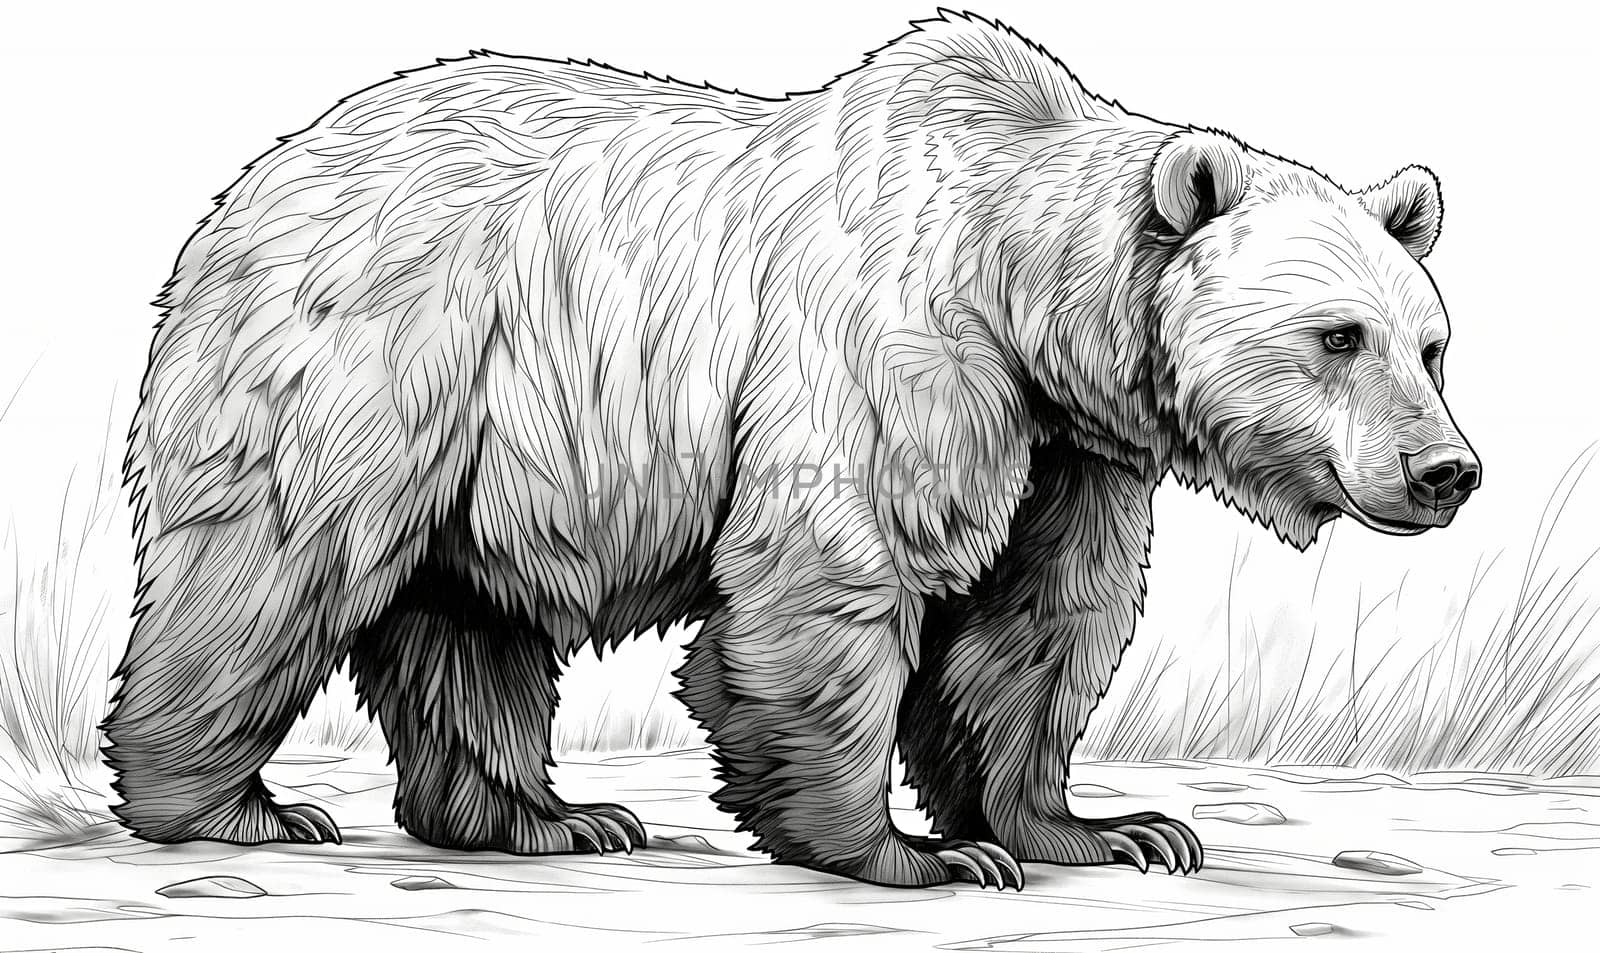 Coloring book for kids, animal coloring, bear. by Fischeron